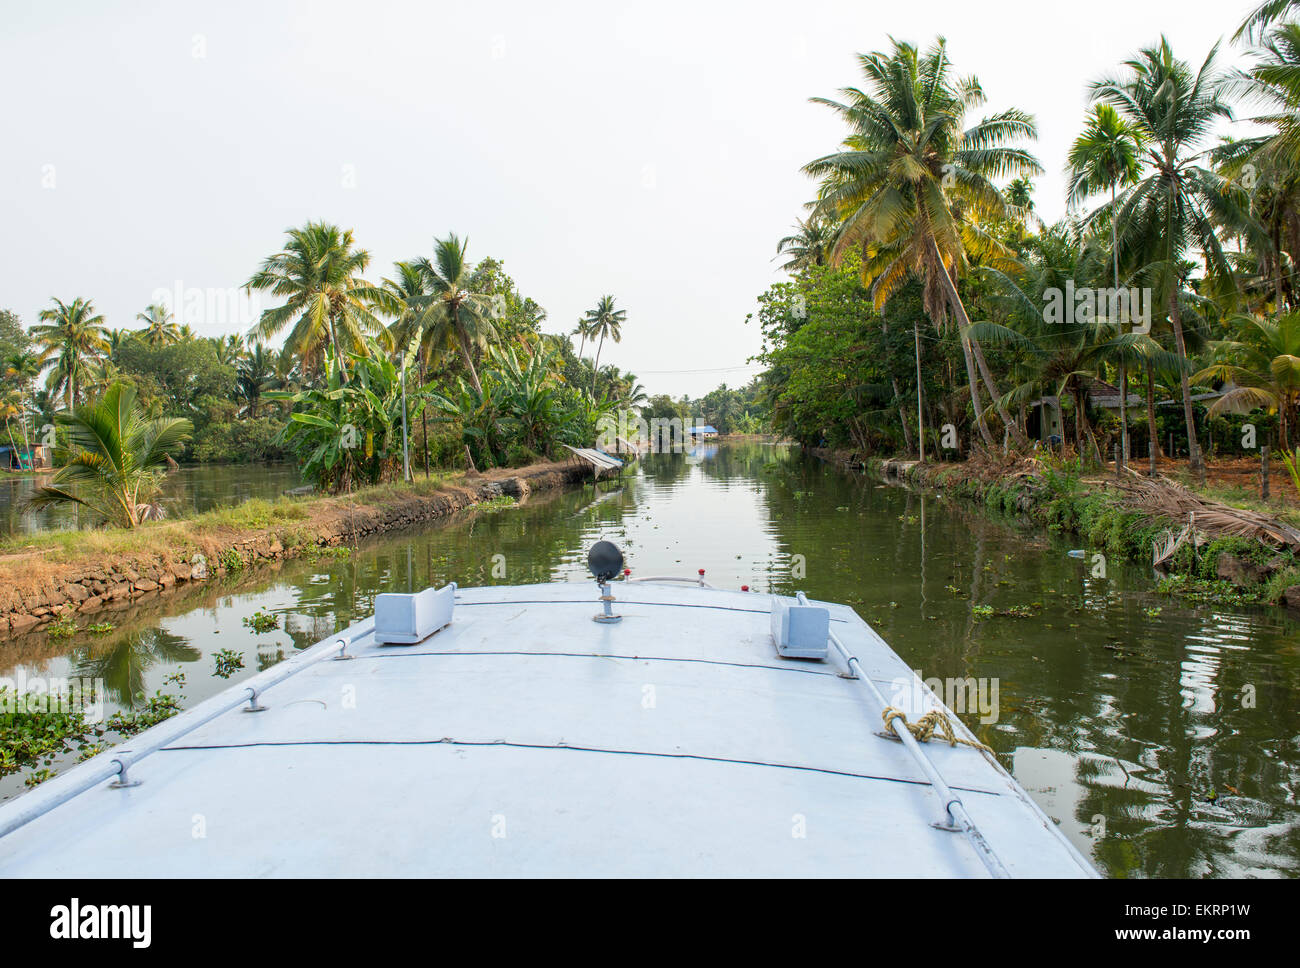 View of the backwaters of Kumarakom from the top of a boat, Kerala India Stock Photo